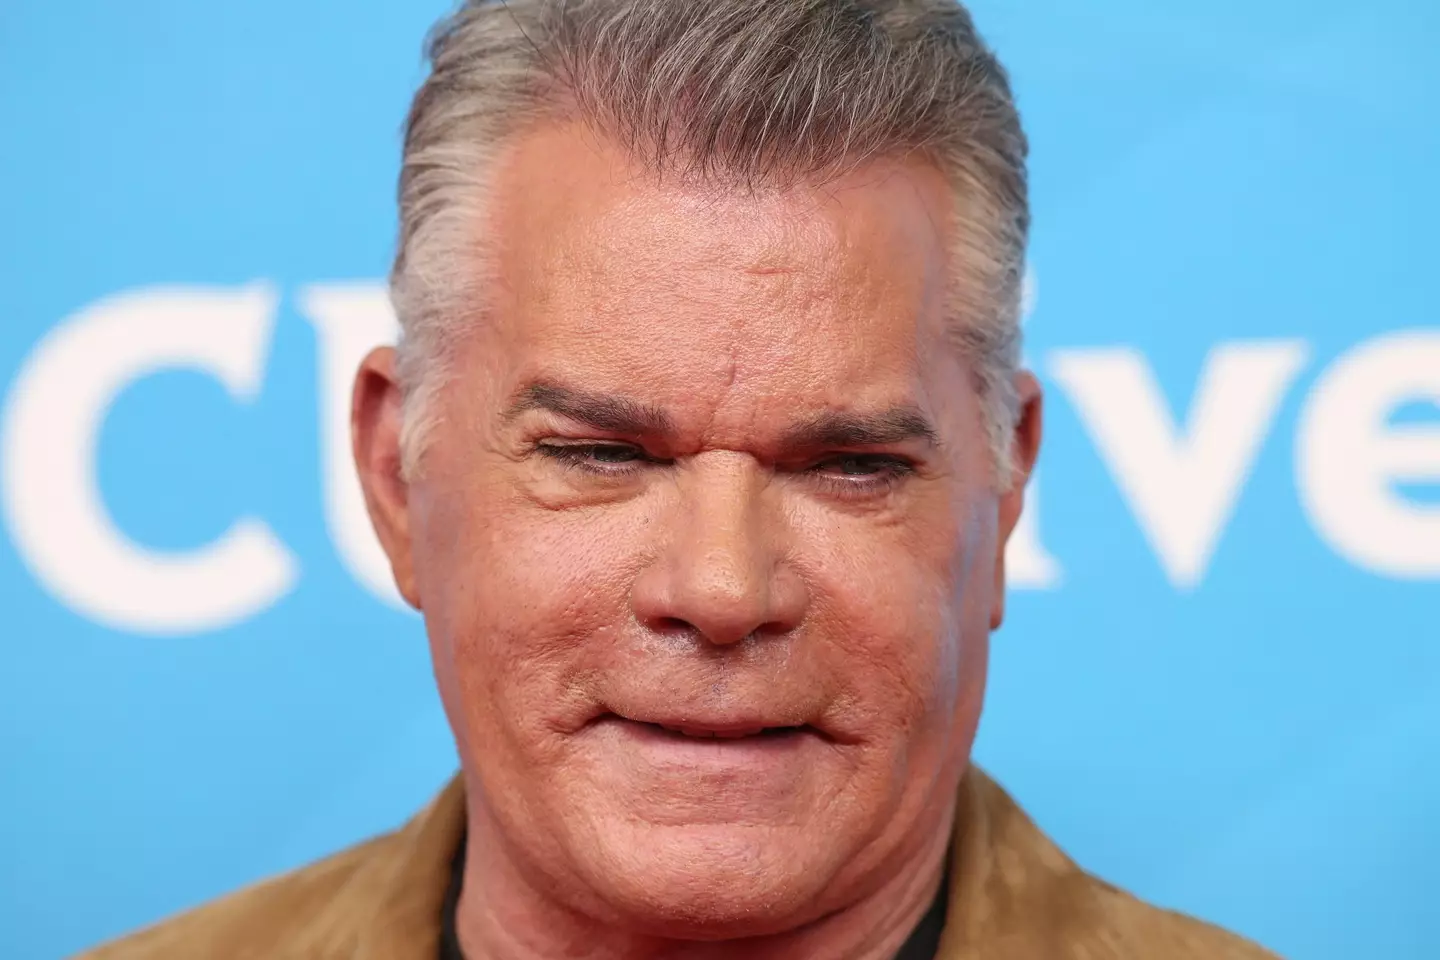 Ray Liotta has passed away at the age of 67.